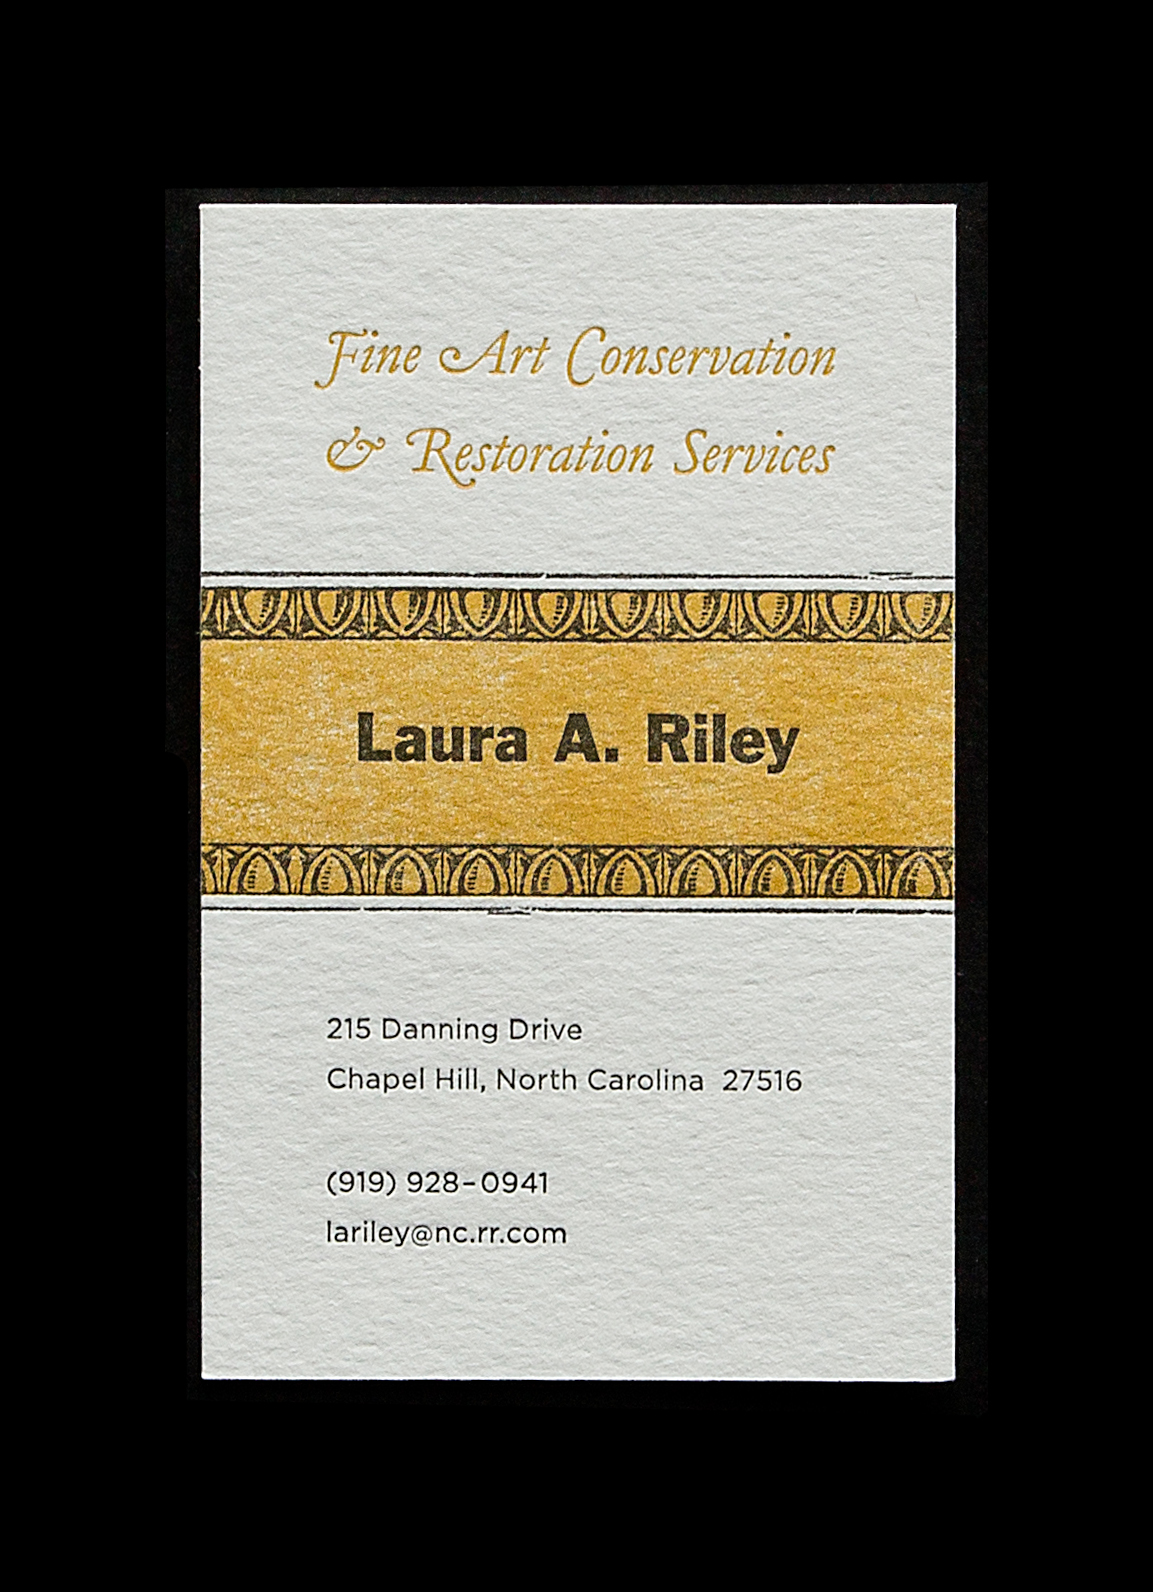  Slightly oversized business card. 2.5 x 4 inches. Purposefully letting the warm yellow background be mottled rather than a flat perfect solid. To show the beauty of irregularity/imperfection. 